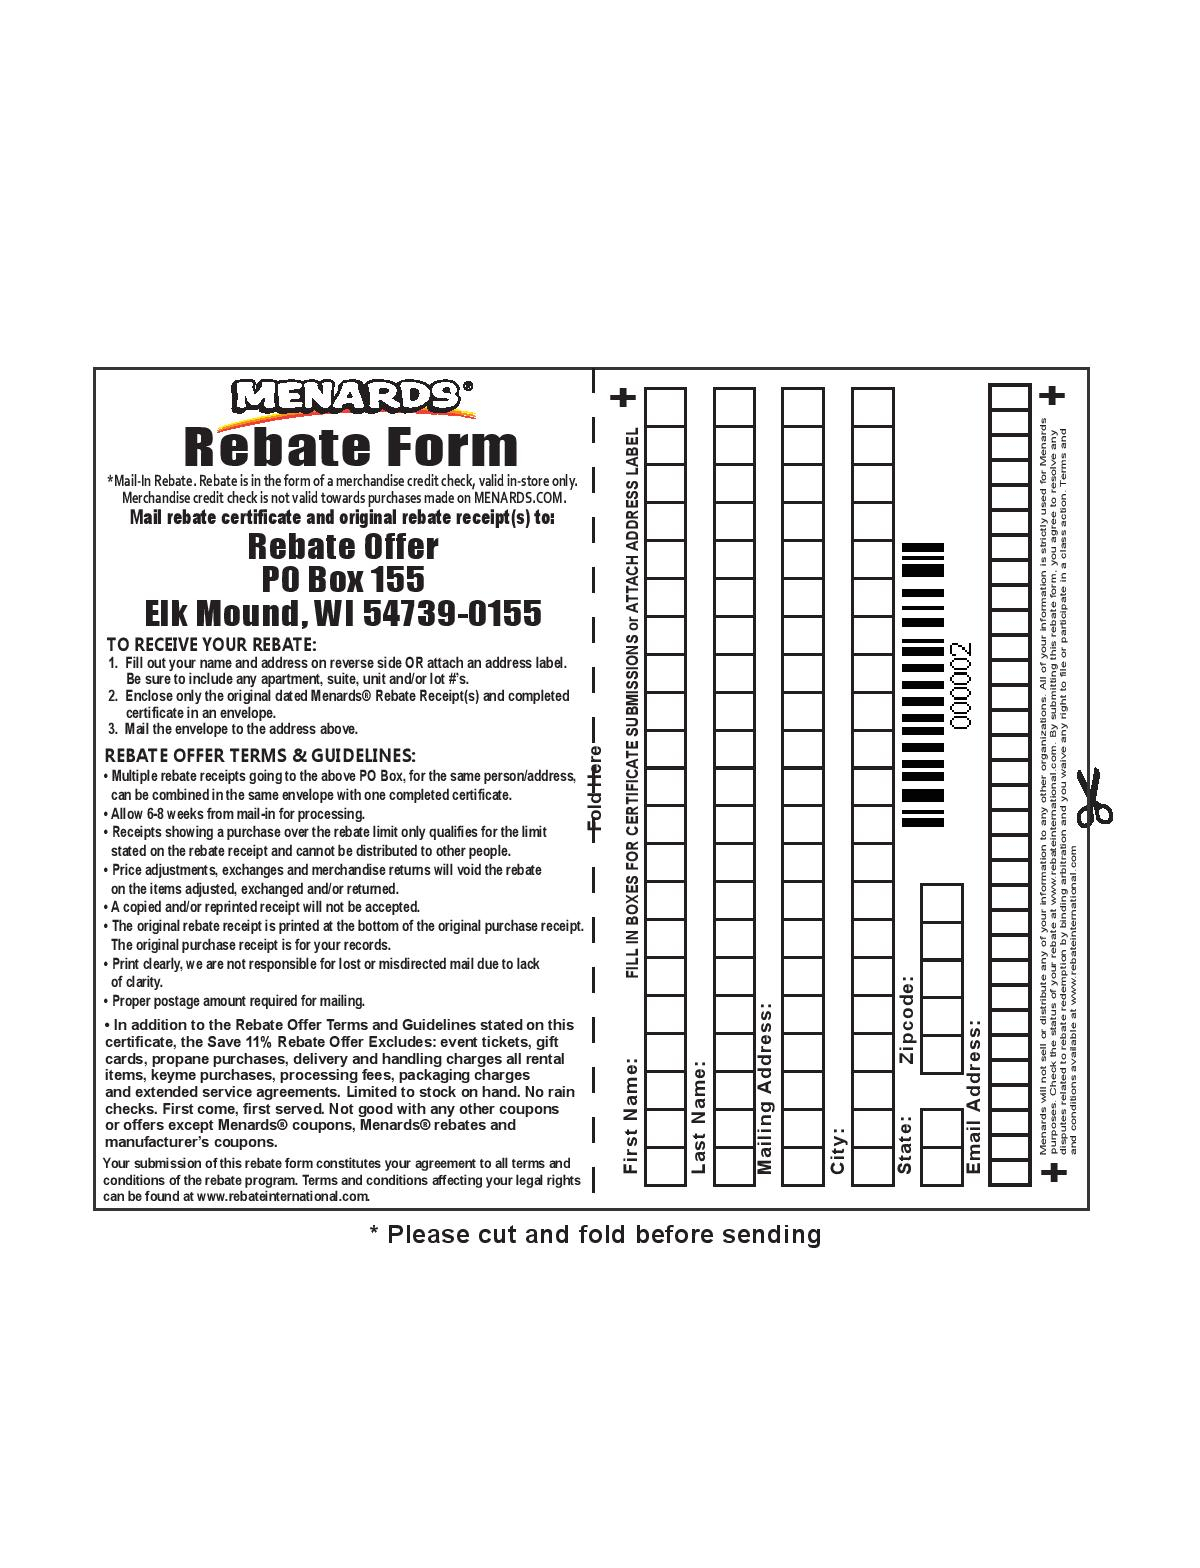 Do You Have To Use Menards Rebate All At Once